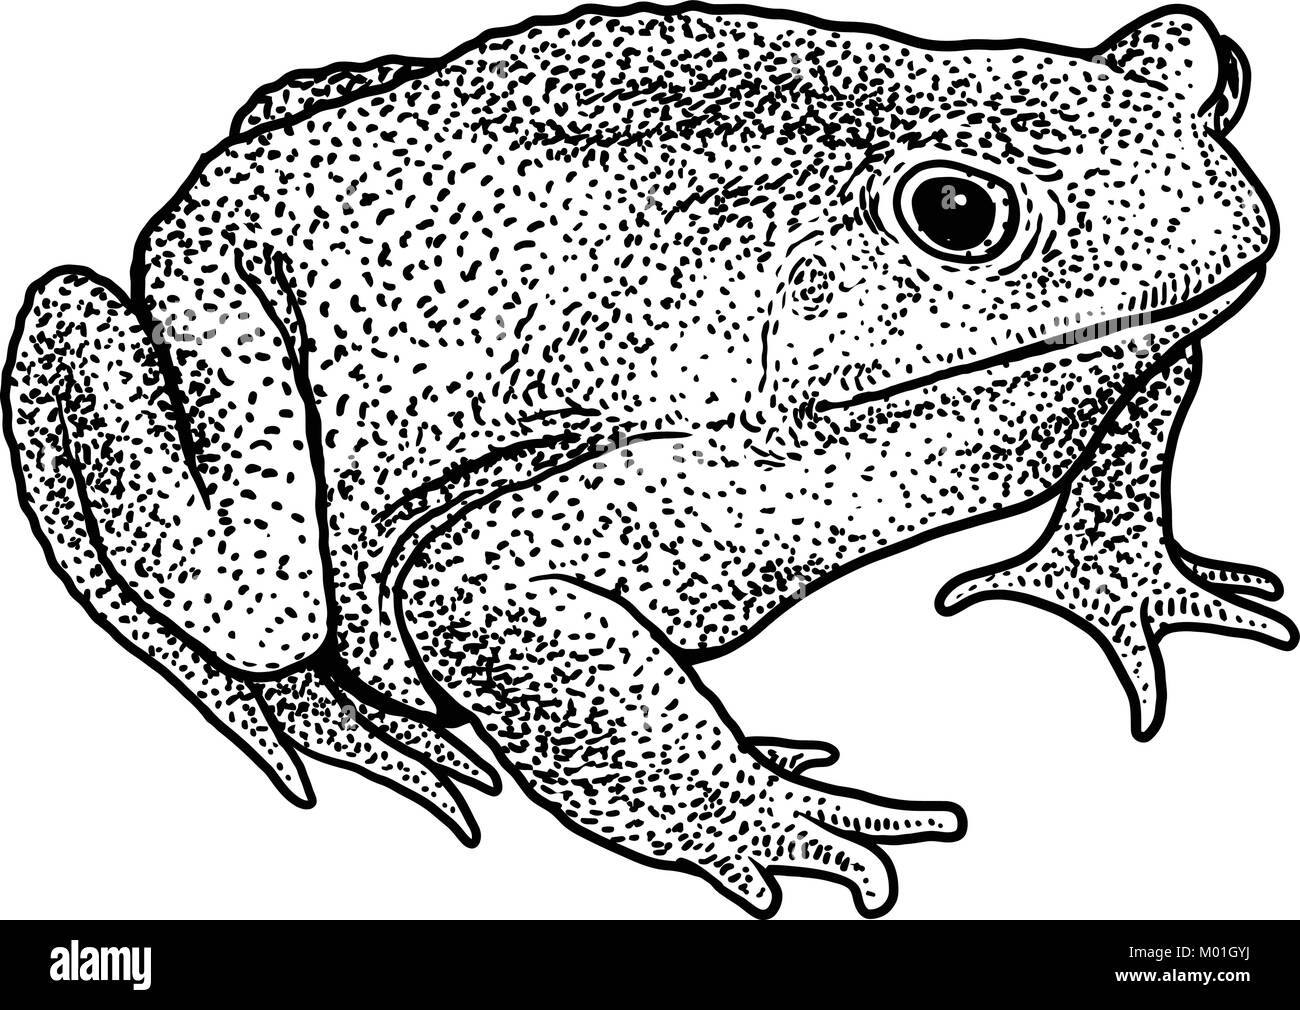 Cane toad illustration, drawing, engraving, ink, line art, vector Stock Vector